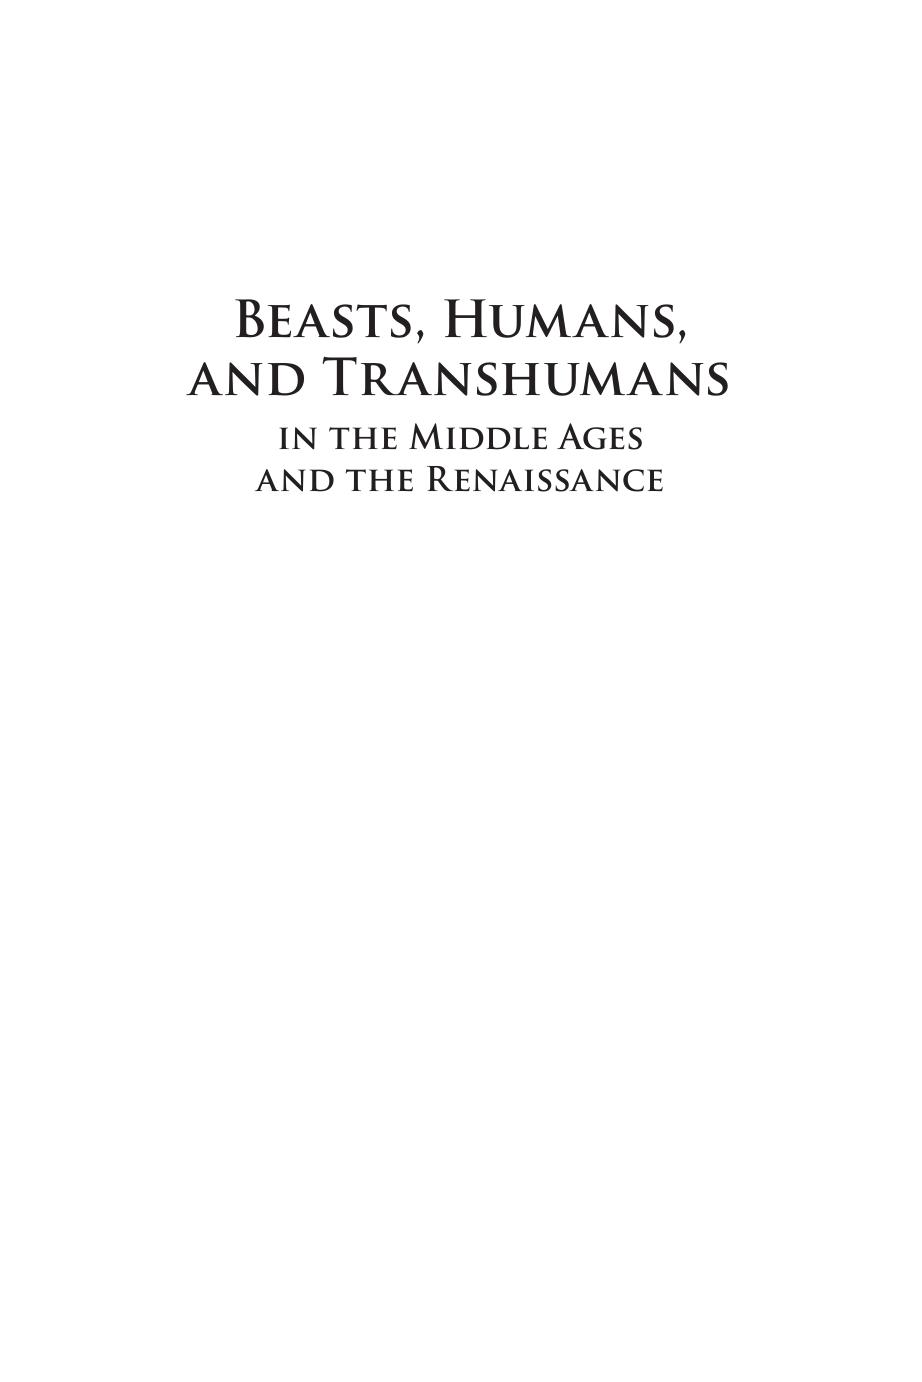 Beasts, Humans, and Transhumans in the Middle Ages and the Renaissance